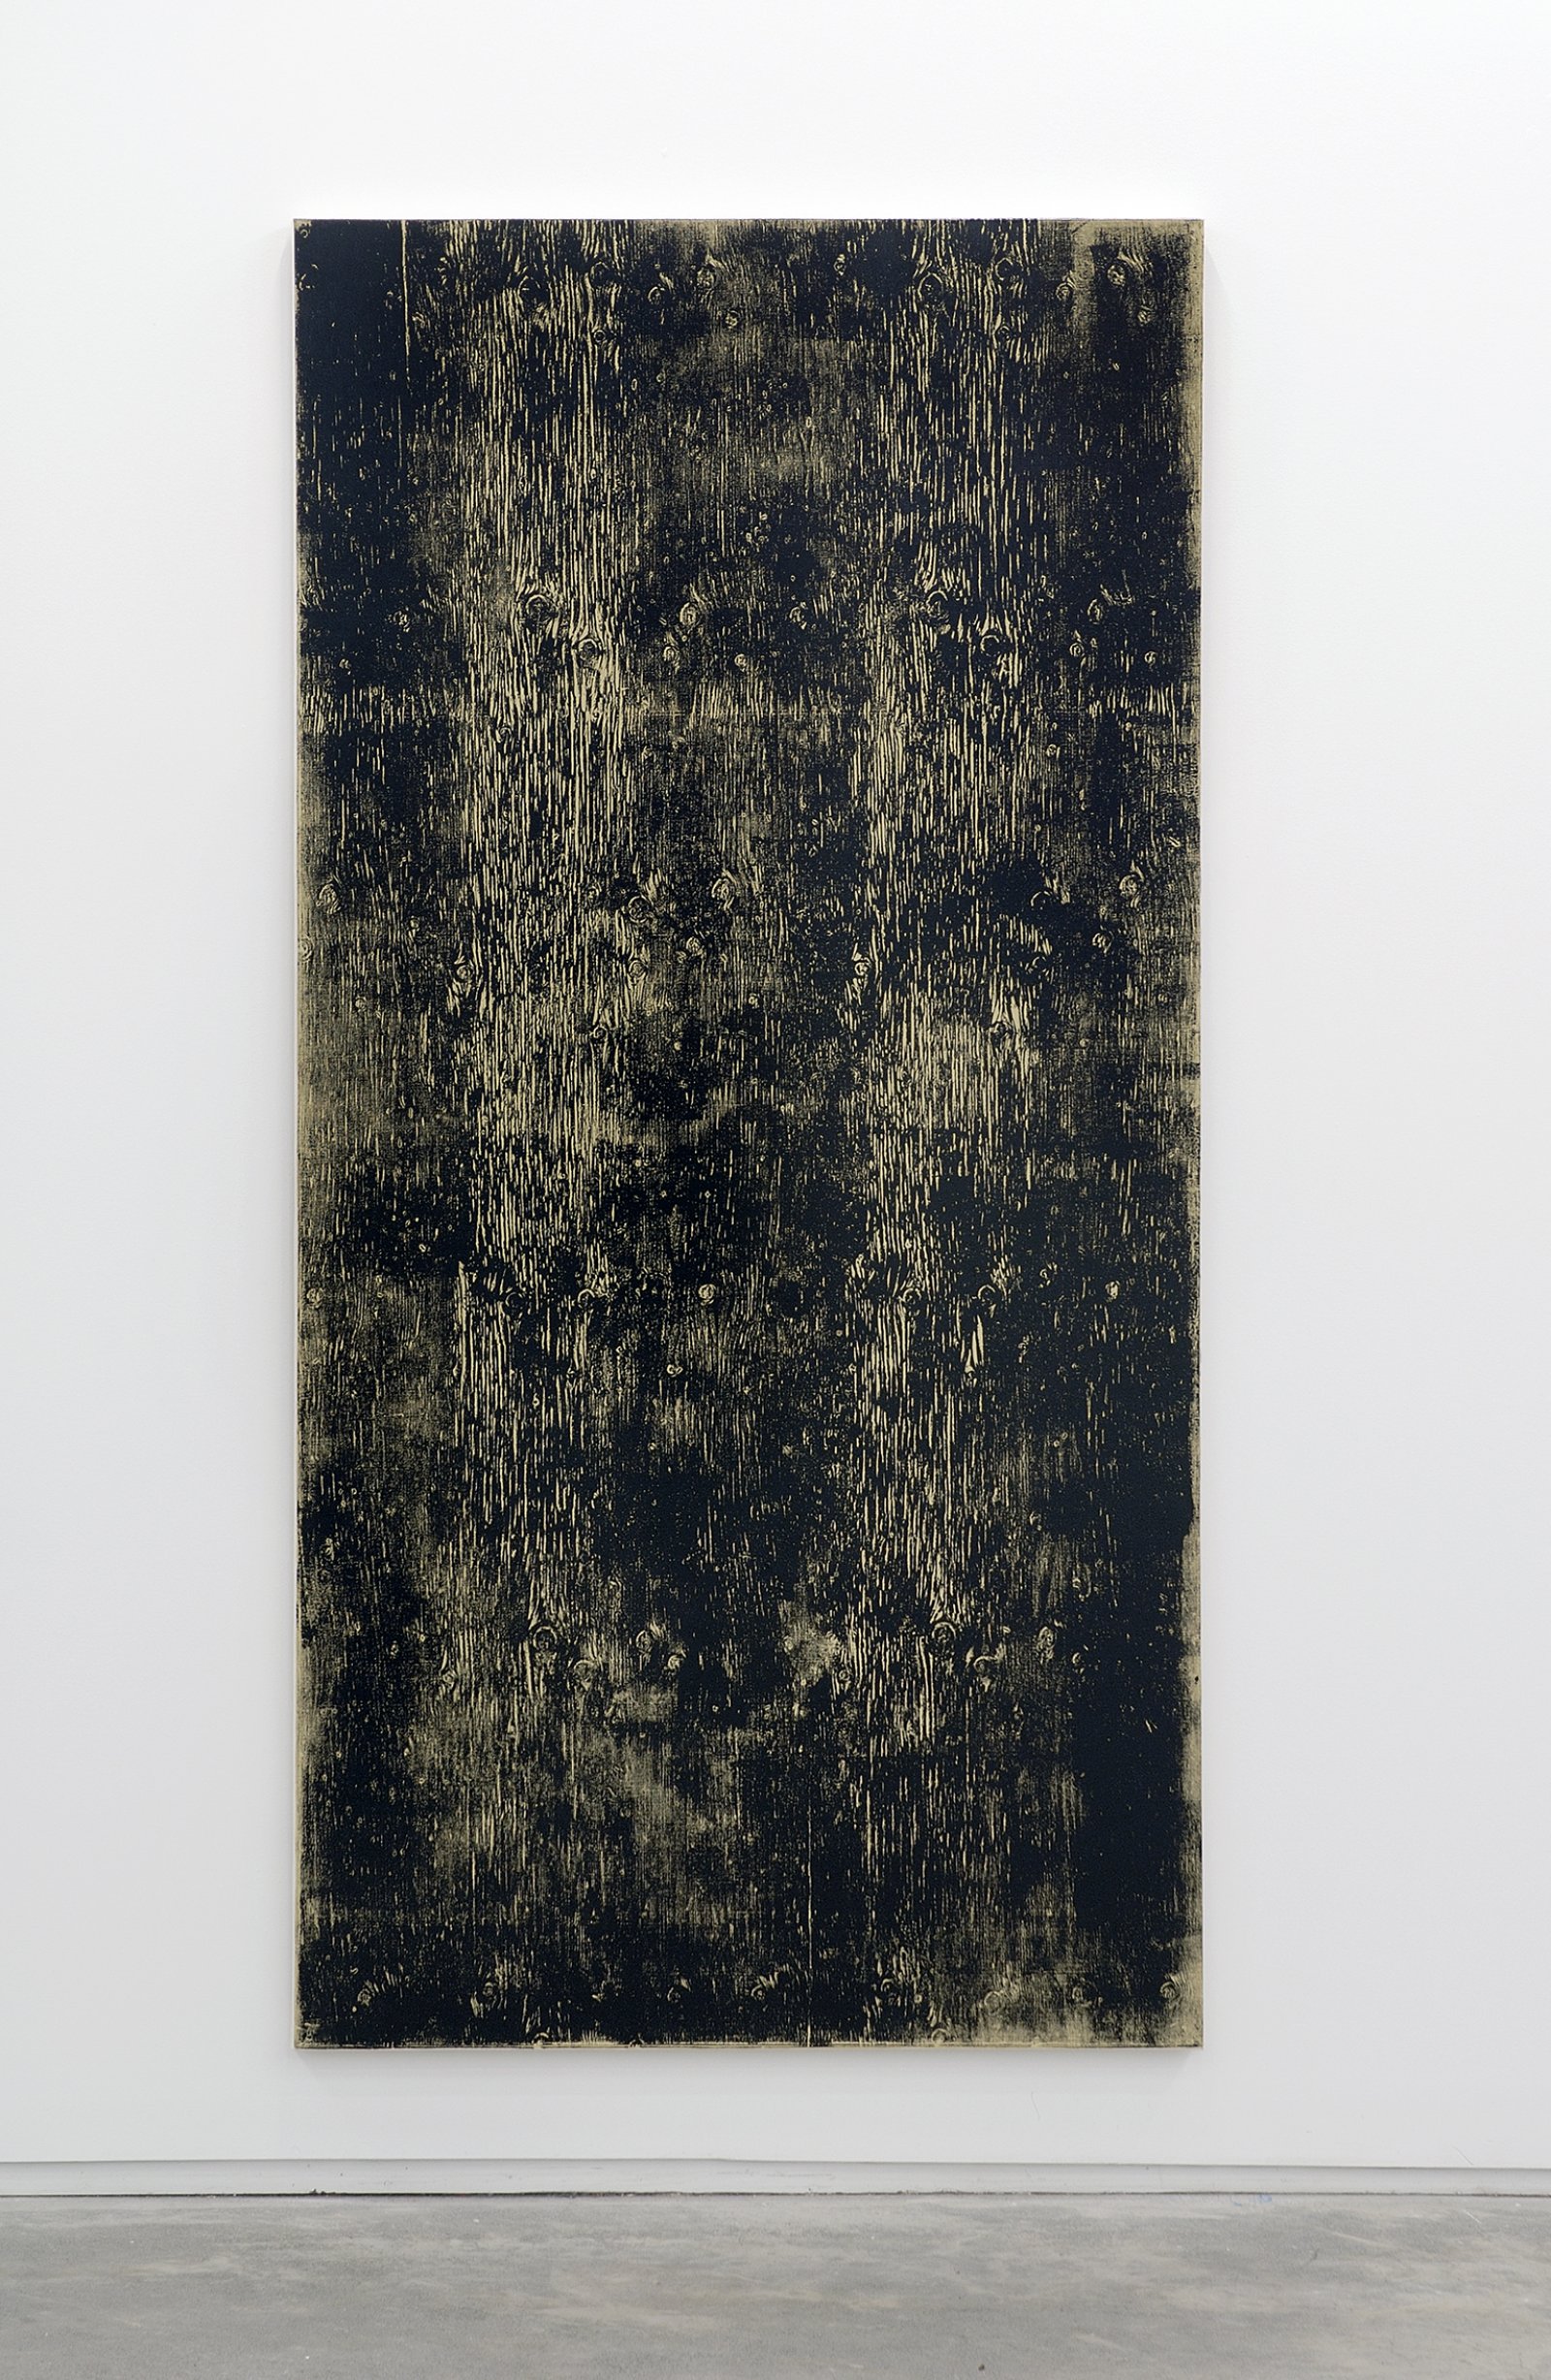 Ian Wallace, Untitled (Monoprint with Mustard), 1990, acrylic on canvas, 90 x 20 in. (229 x 51 cm) by Ian Wallace